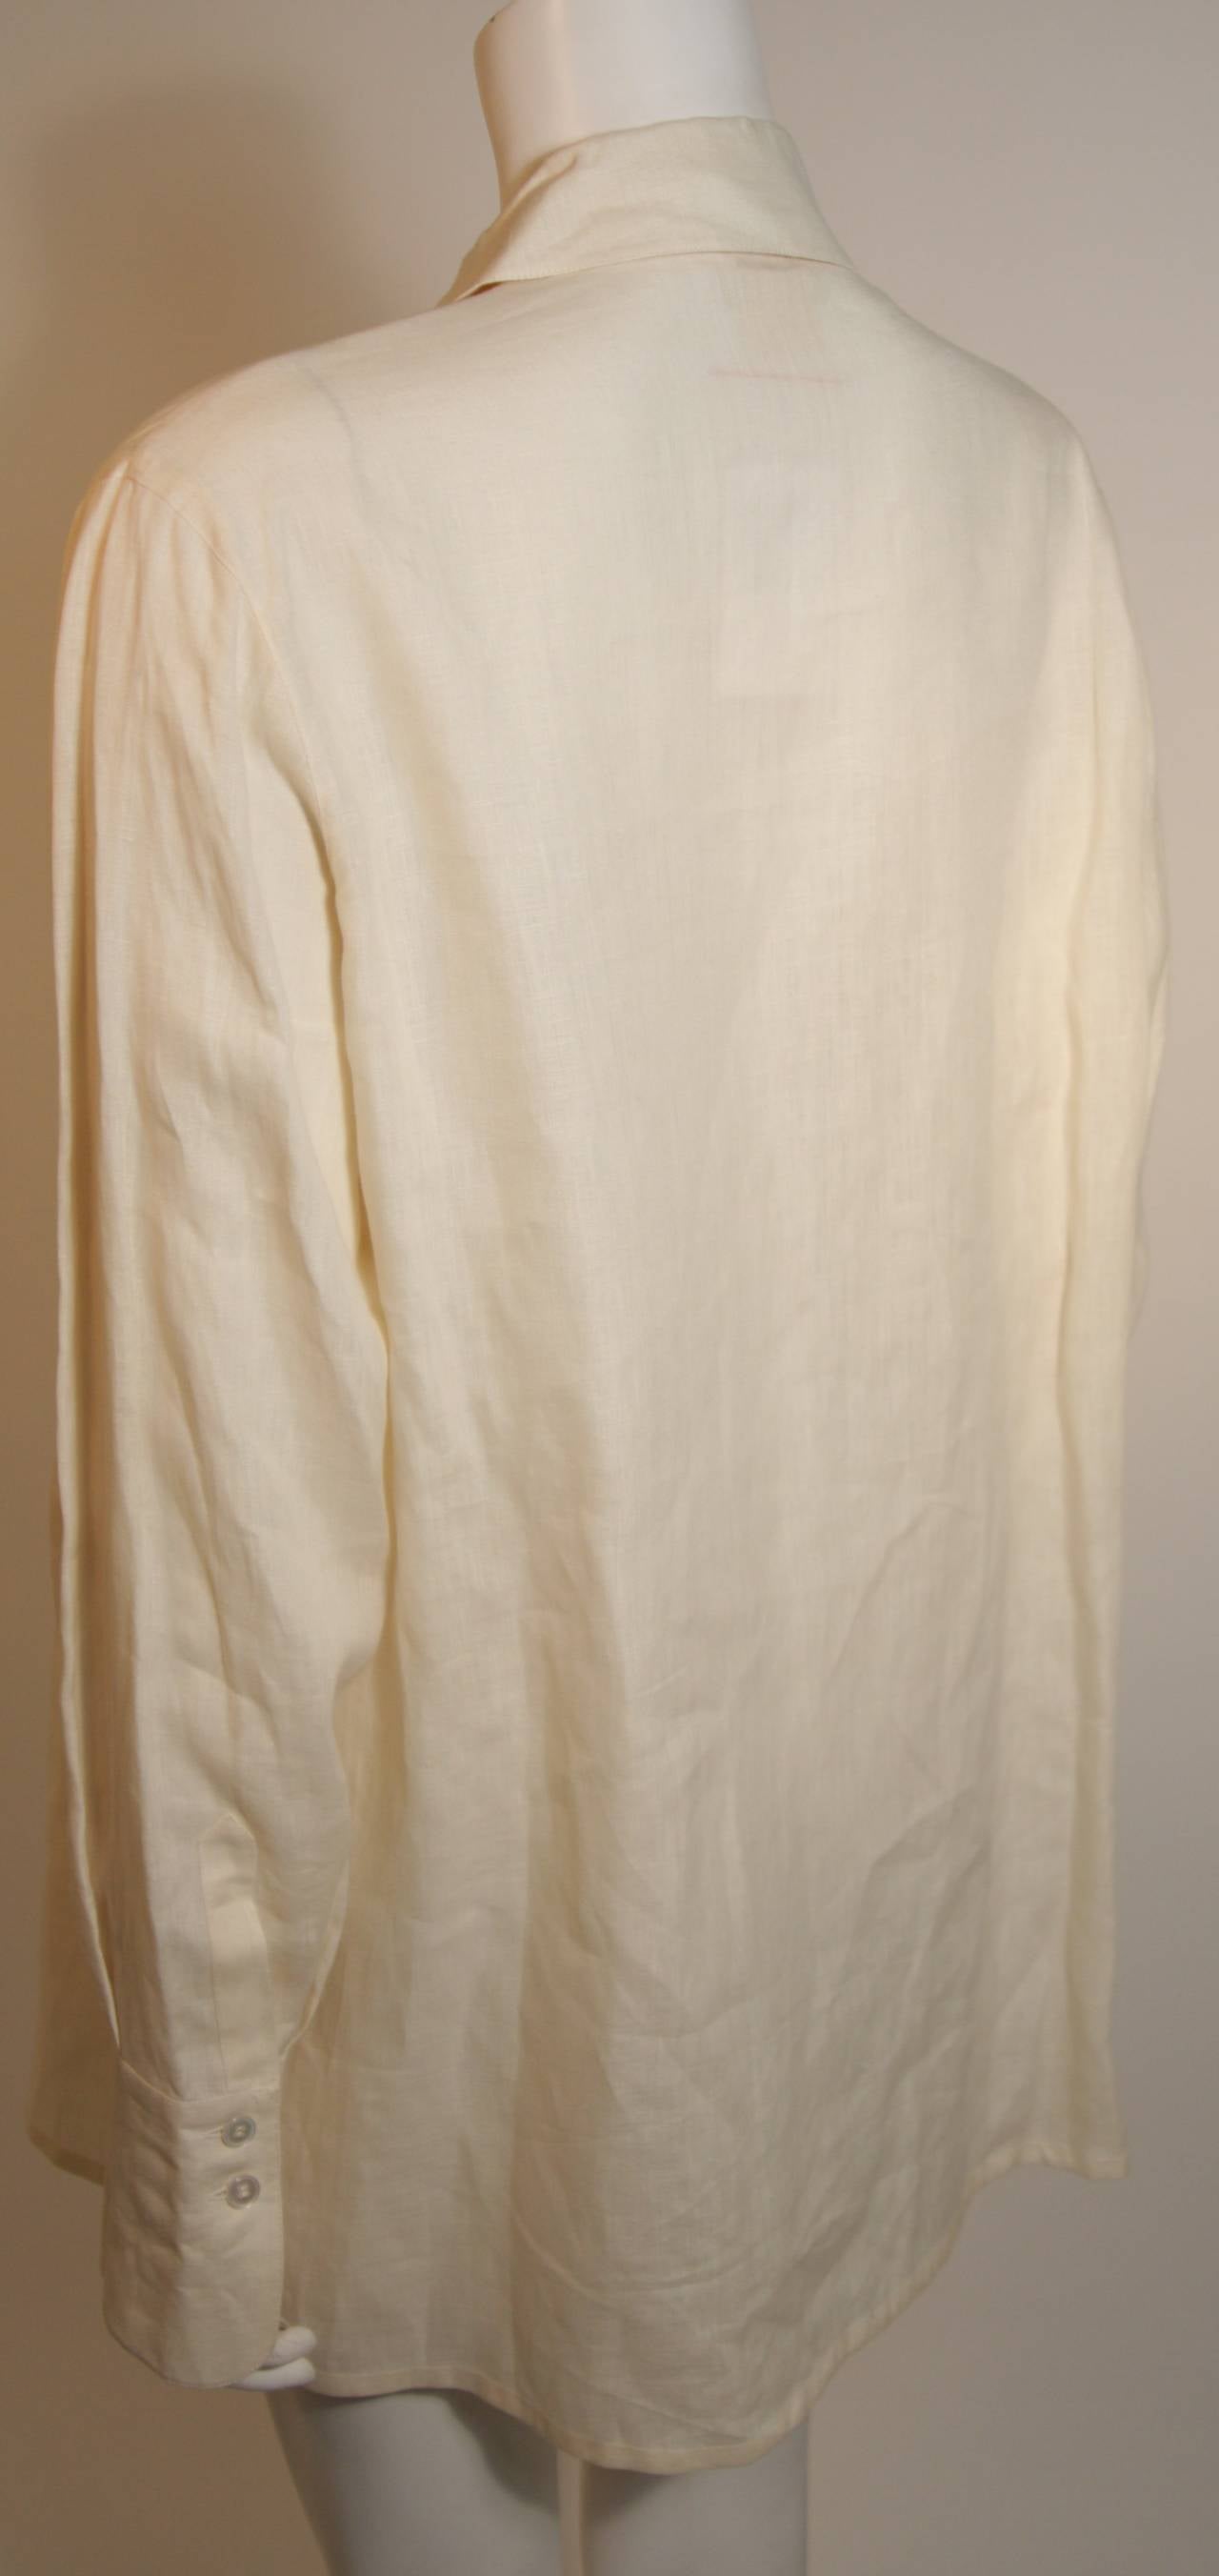 Hermes Linen Shirt with Original Tags Size 46 3